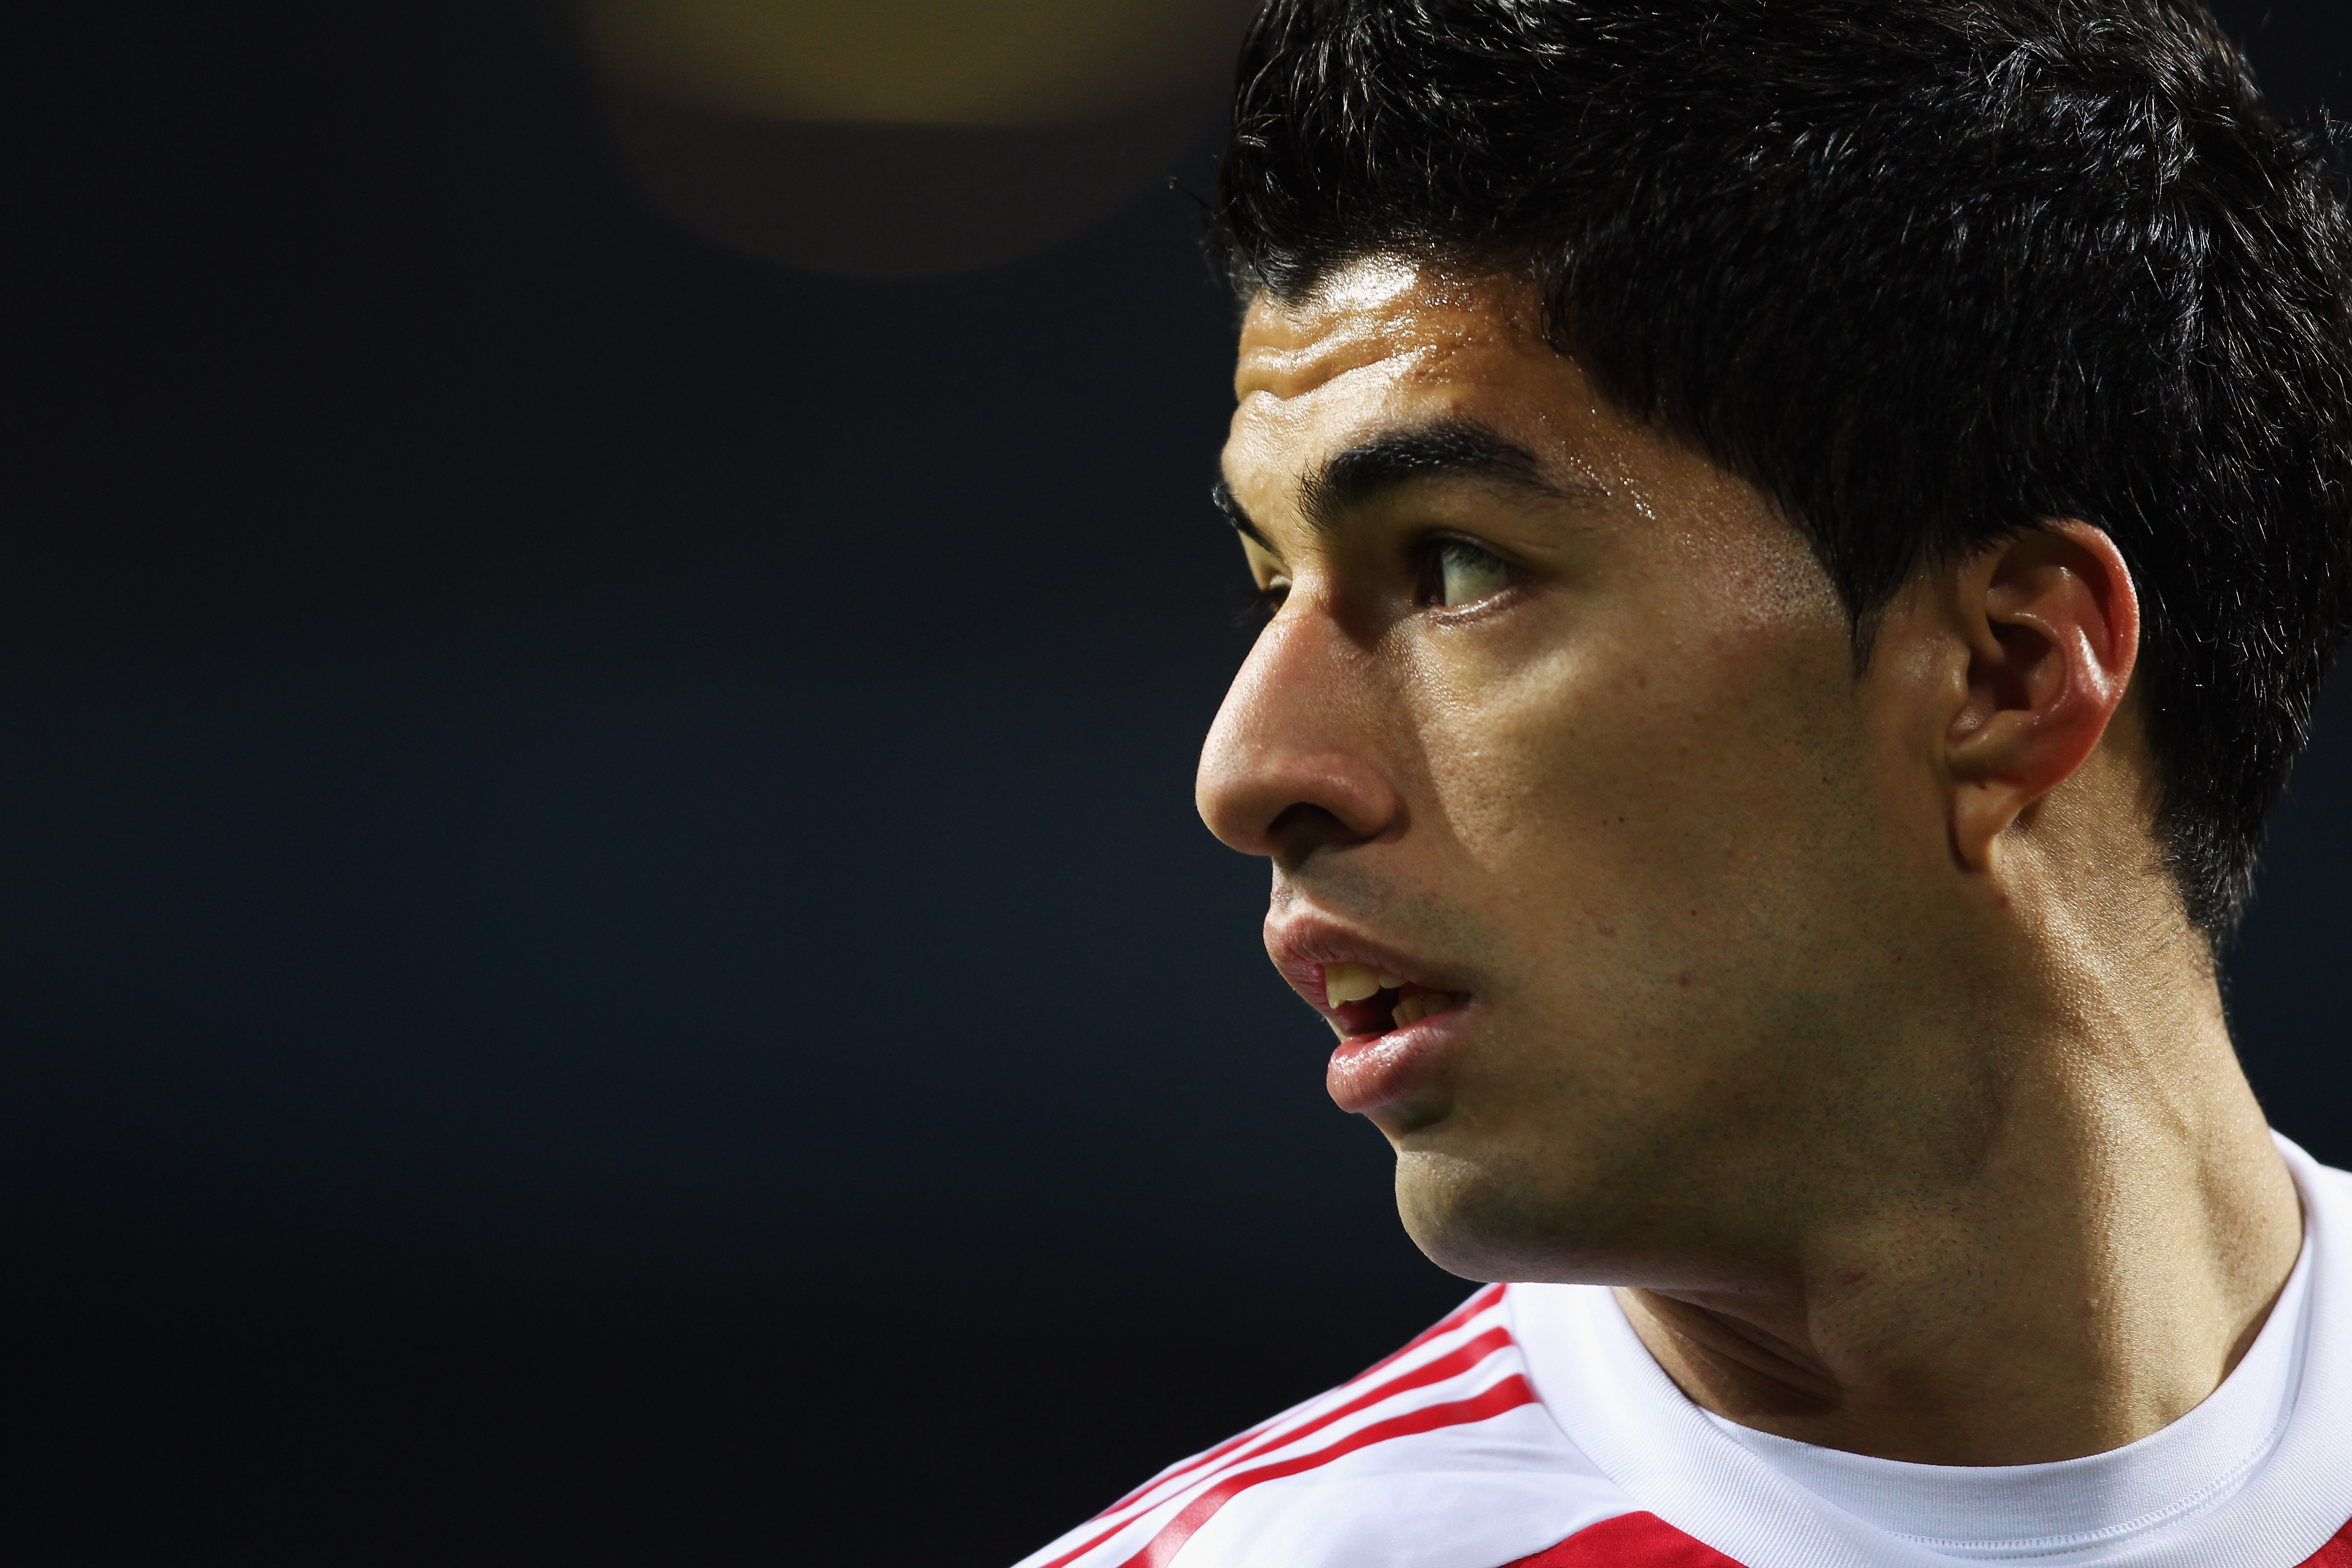 AMSTERDAM, NETHERLANDS - OCTOBER 19:  Luis Suarez of AFC Ajax looks on during the UEFA Champions League Group G match between AFC Ajax and AJ Auxerre at the Amsterdam ArenA on October 19, 2010 in Amsterdam, Netherlands.  (Photo by Bryn Lennon/Getty Images